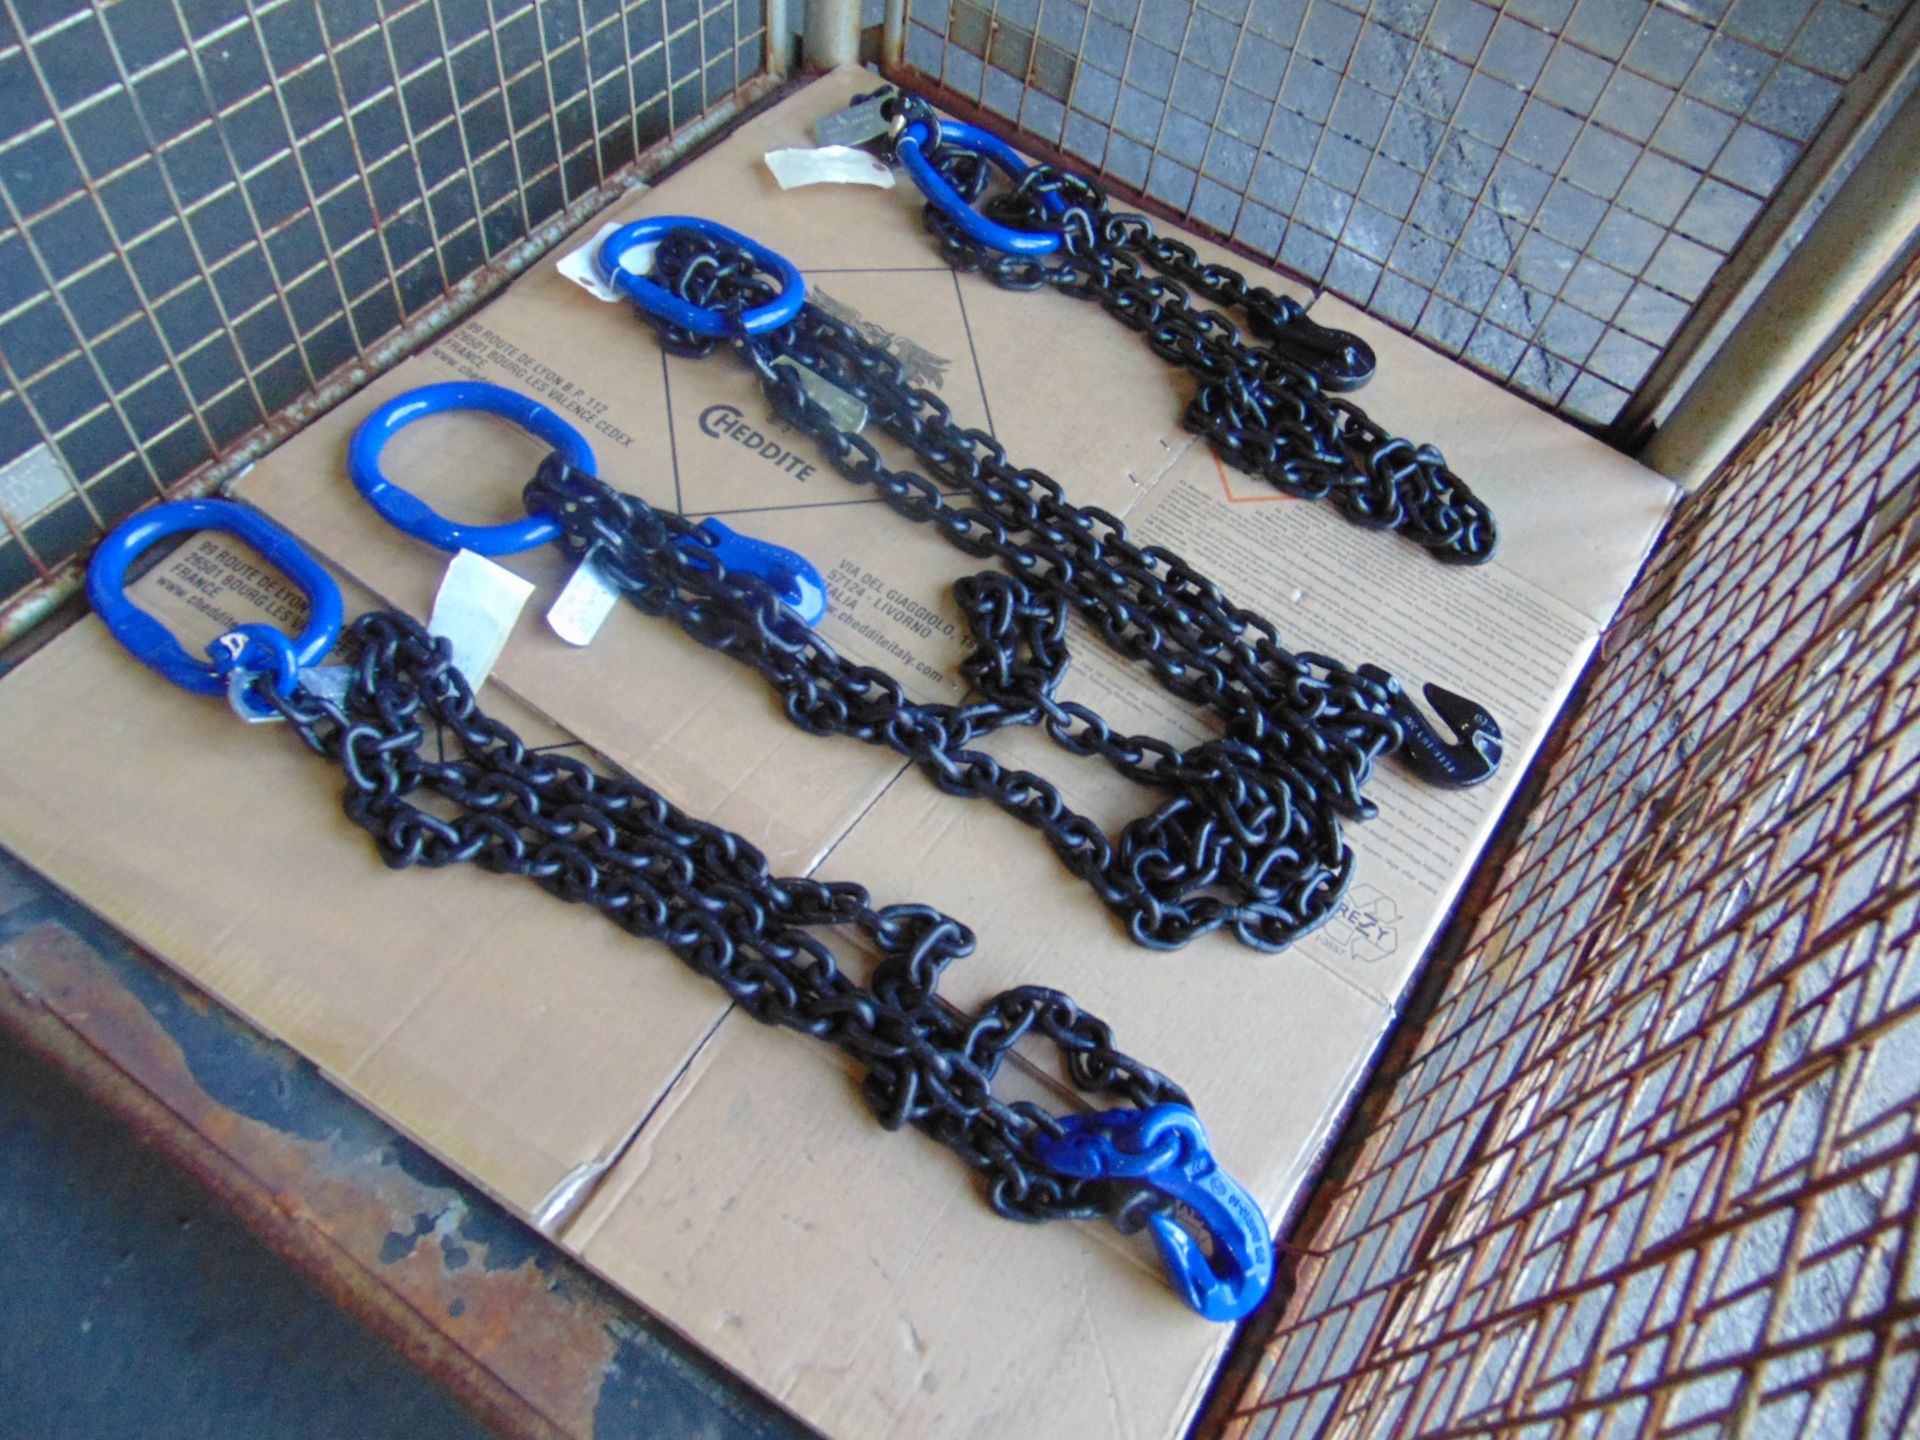 4x New Unissued 10ft Lifting Chains c/w Labels - Image 2 of 7